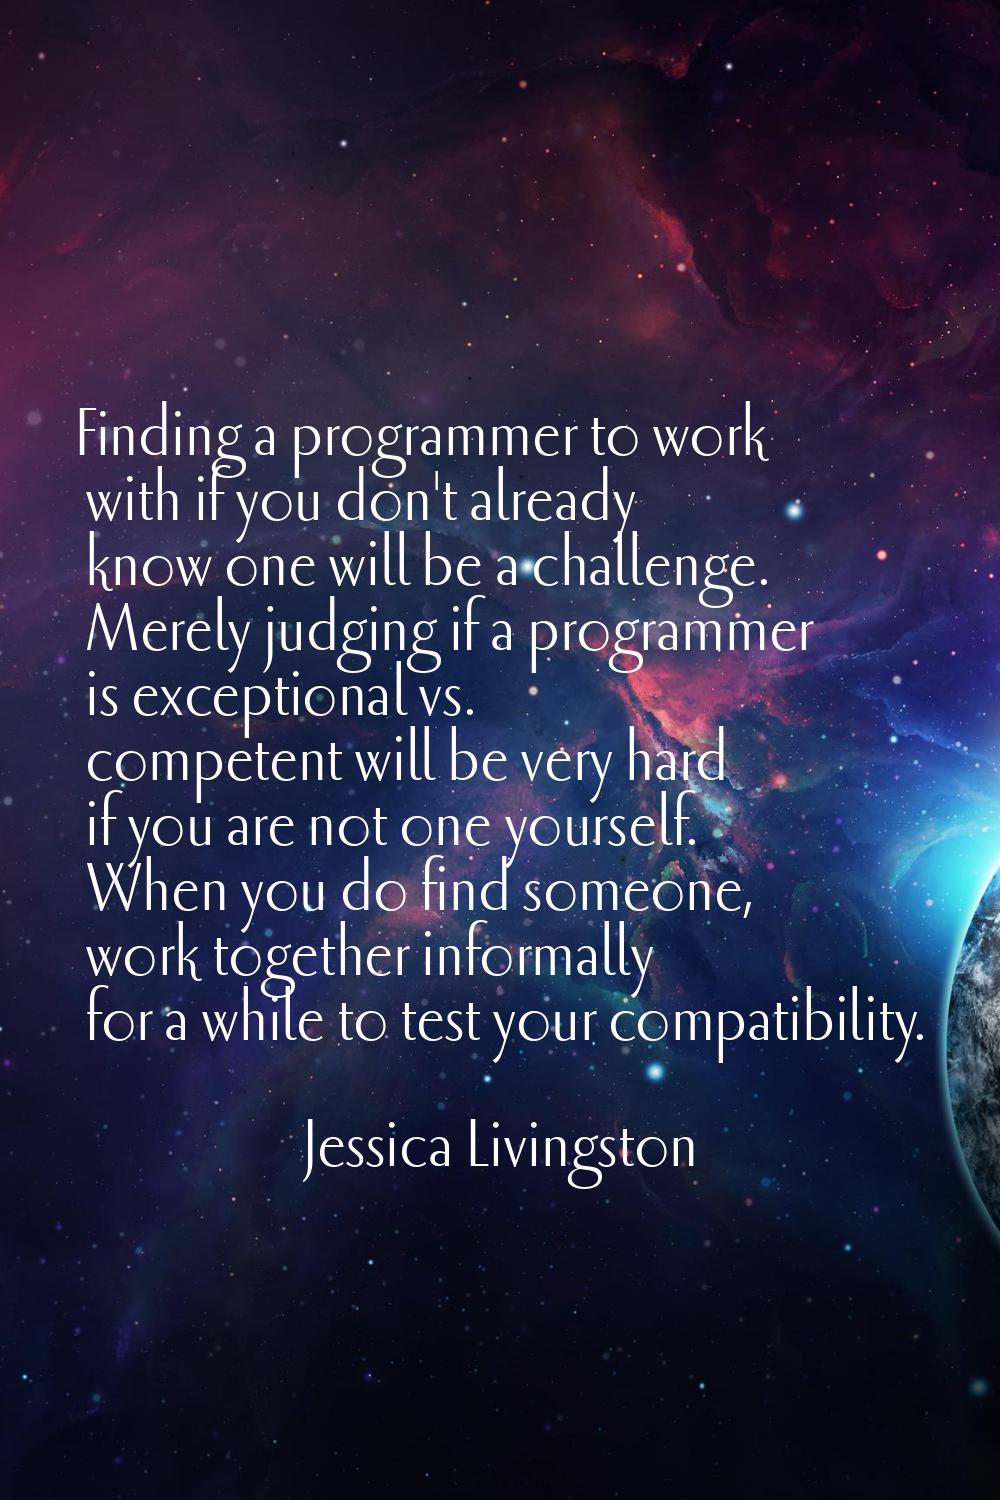 Finding a programmer to work with if you don't already know one will be a challenge. Merely judging